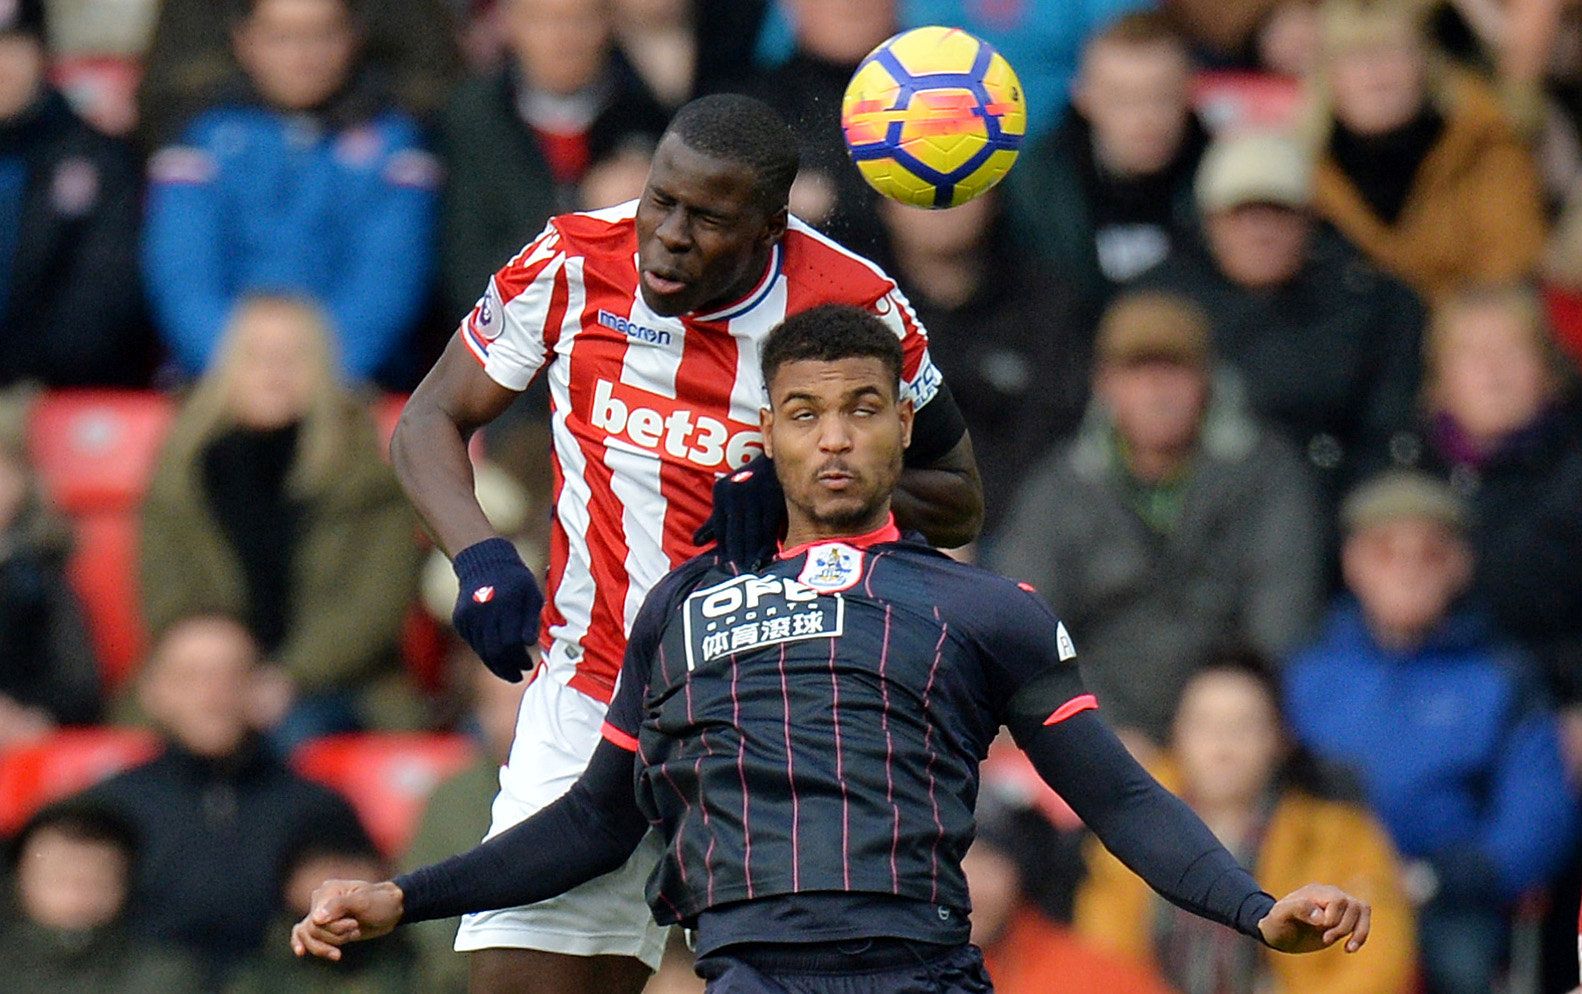 Soccer Football - Premier League - Stoke City vs Huddersfield Town - bet365 Stadium, Stoke-on-Trent, Britain - January 20, 2018   Huddersfield Town’s Steve Mounie in action with Stoke City's Kurt Zouma    REUTERS/Peter Powell    EDITORIAL USE ONLY. No use with unauthorized audio, video, data, fixture lists, club/league logos or "live" services. Online in-match use limited to 75 images, no video emulation. No use in betting, games or single club/league/player publications.  Please contact your ac